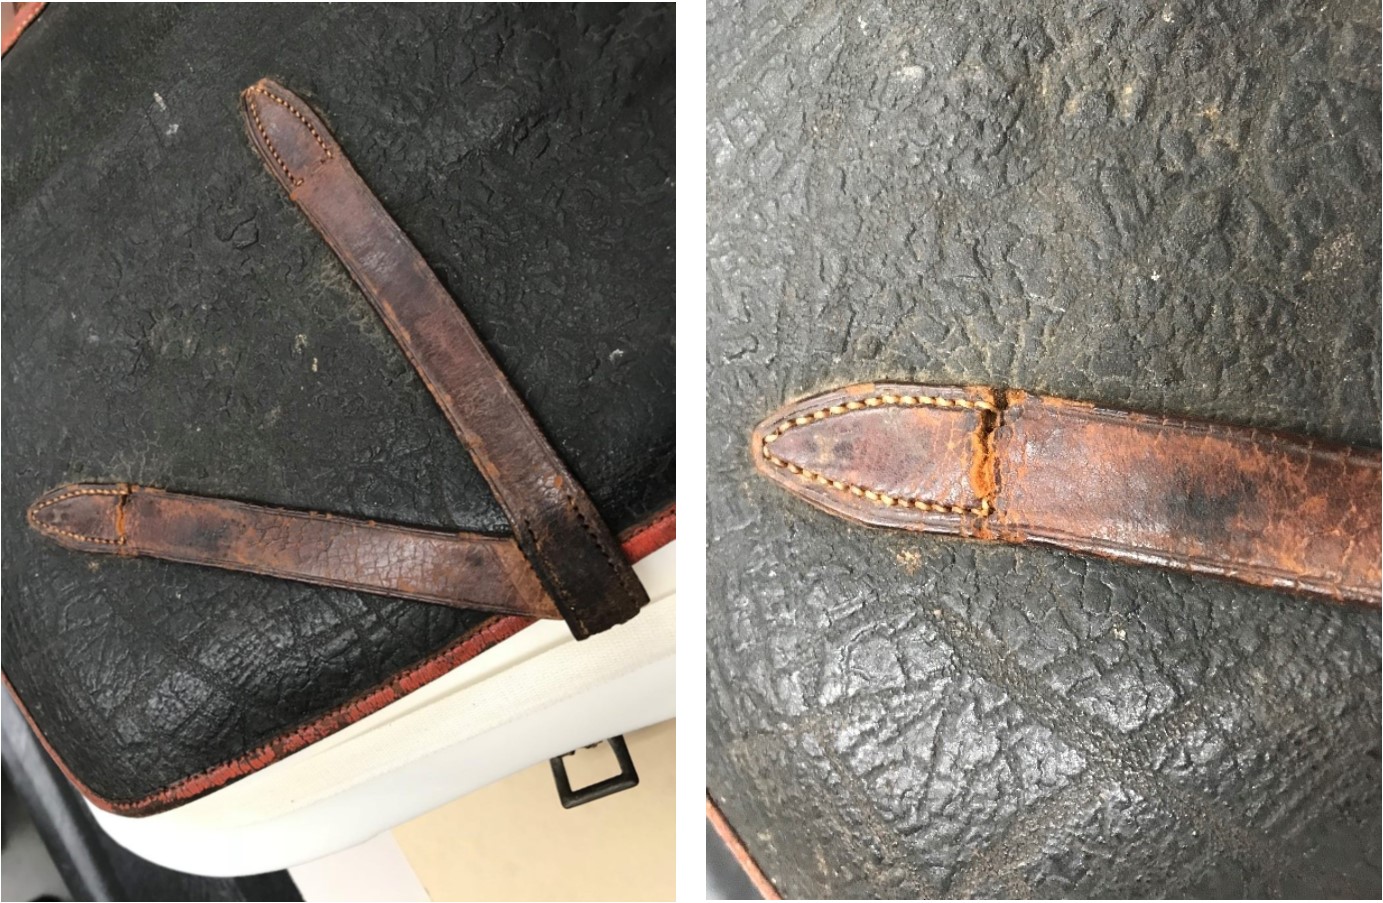 Two images: (left) photograph of worn black leather bag with two worn brown straps; (right) close up photograph of a damaged strap with the end almost ripped off.